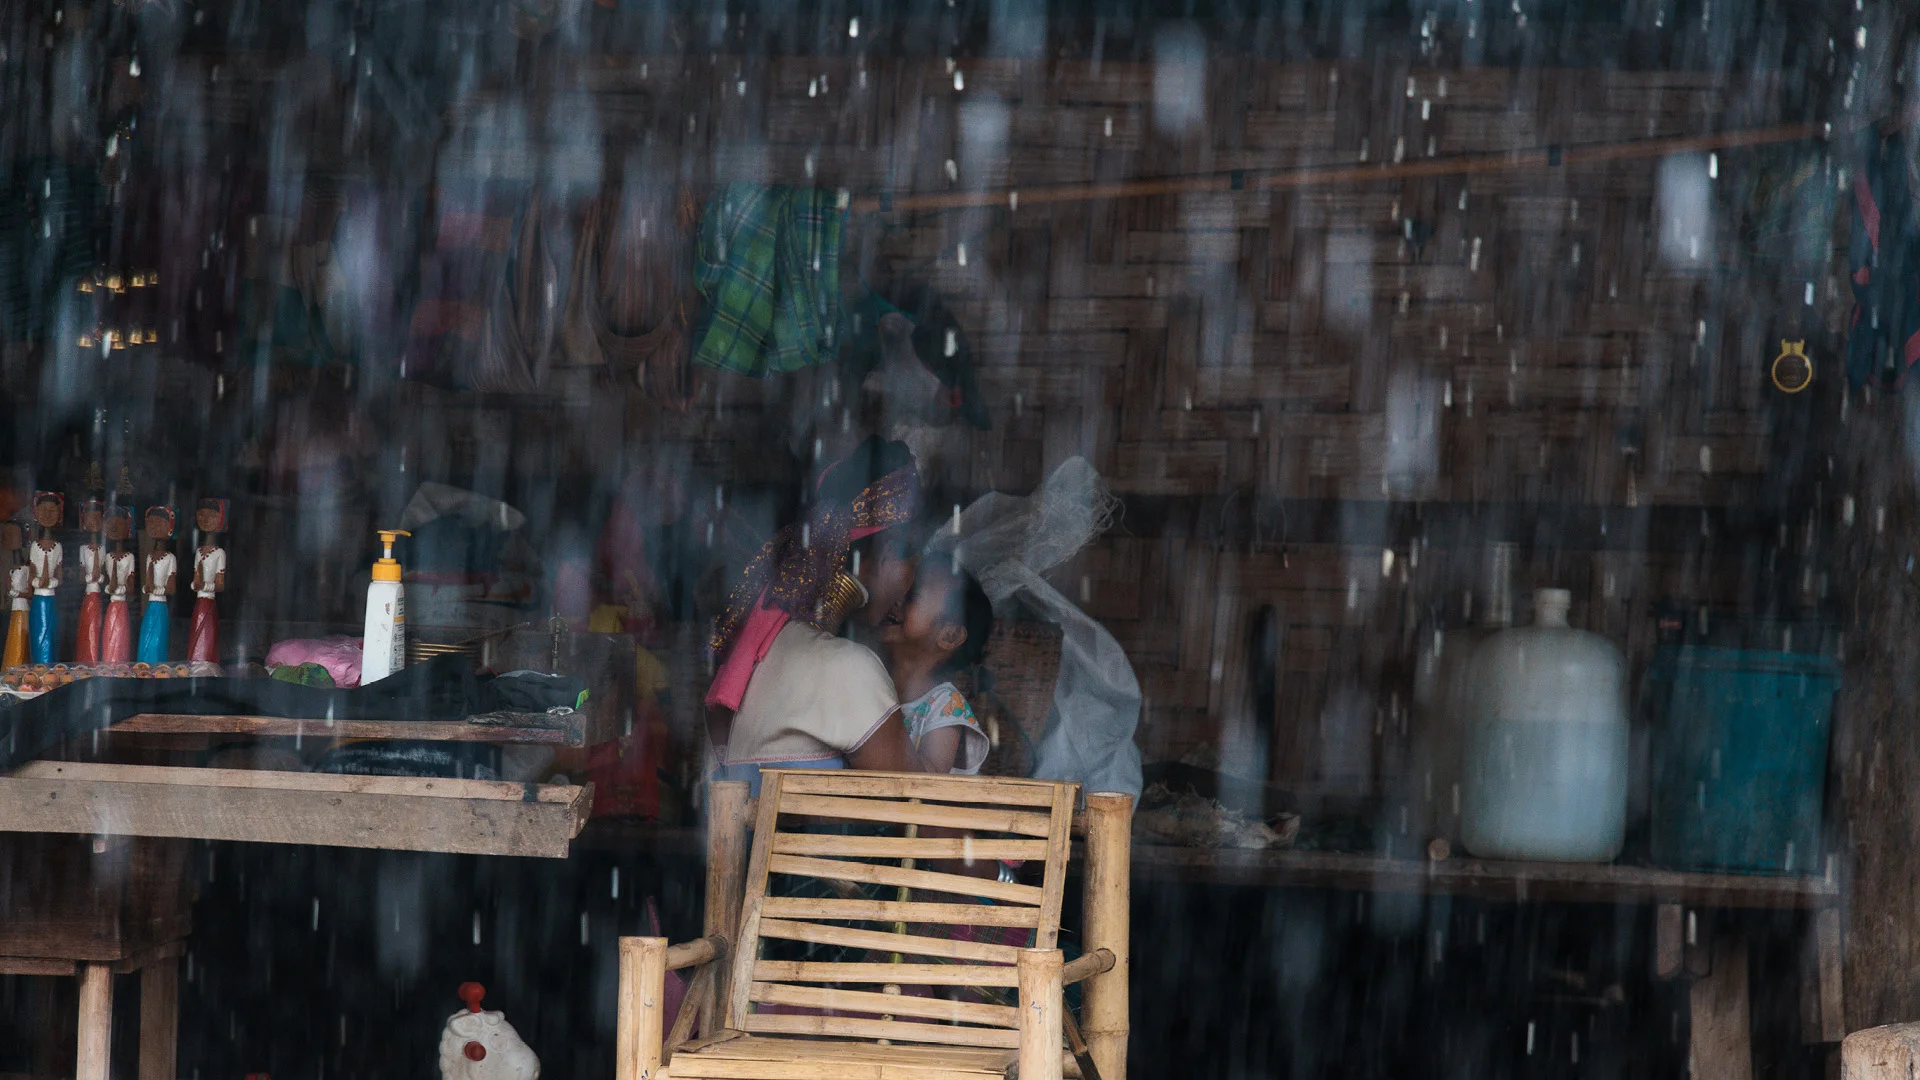 Mother and daughter kissing during heavy rain in Huay Pu Keng, close to Mae Hong Son, Thailand